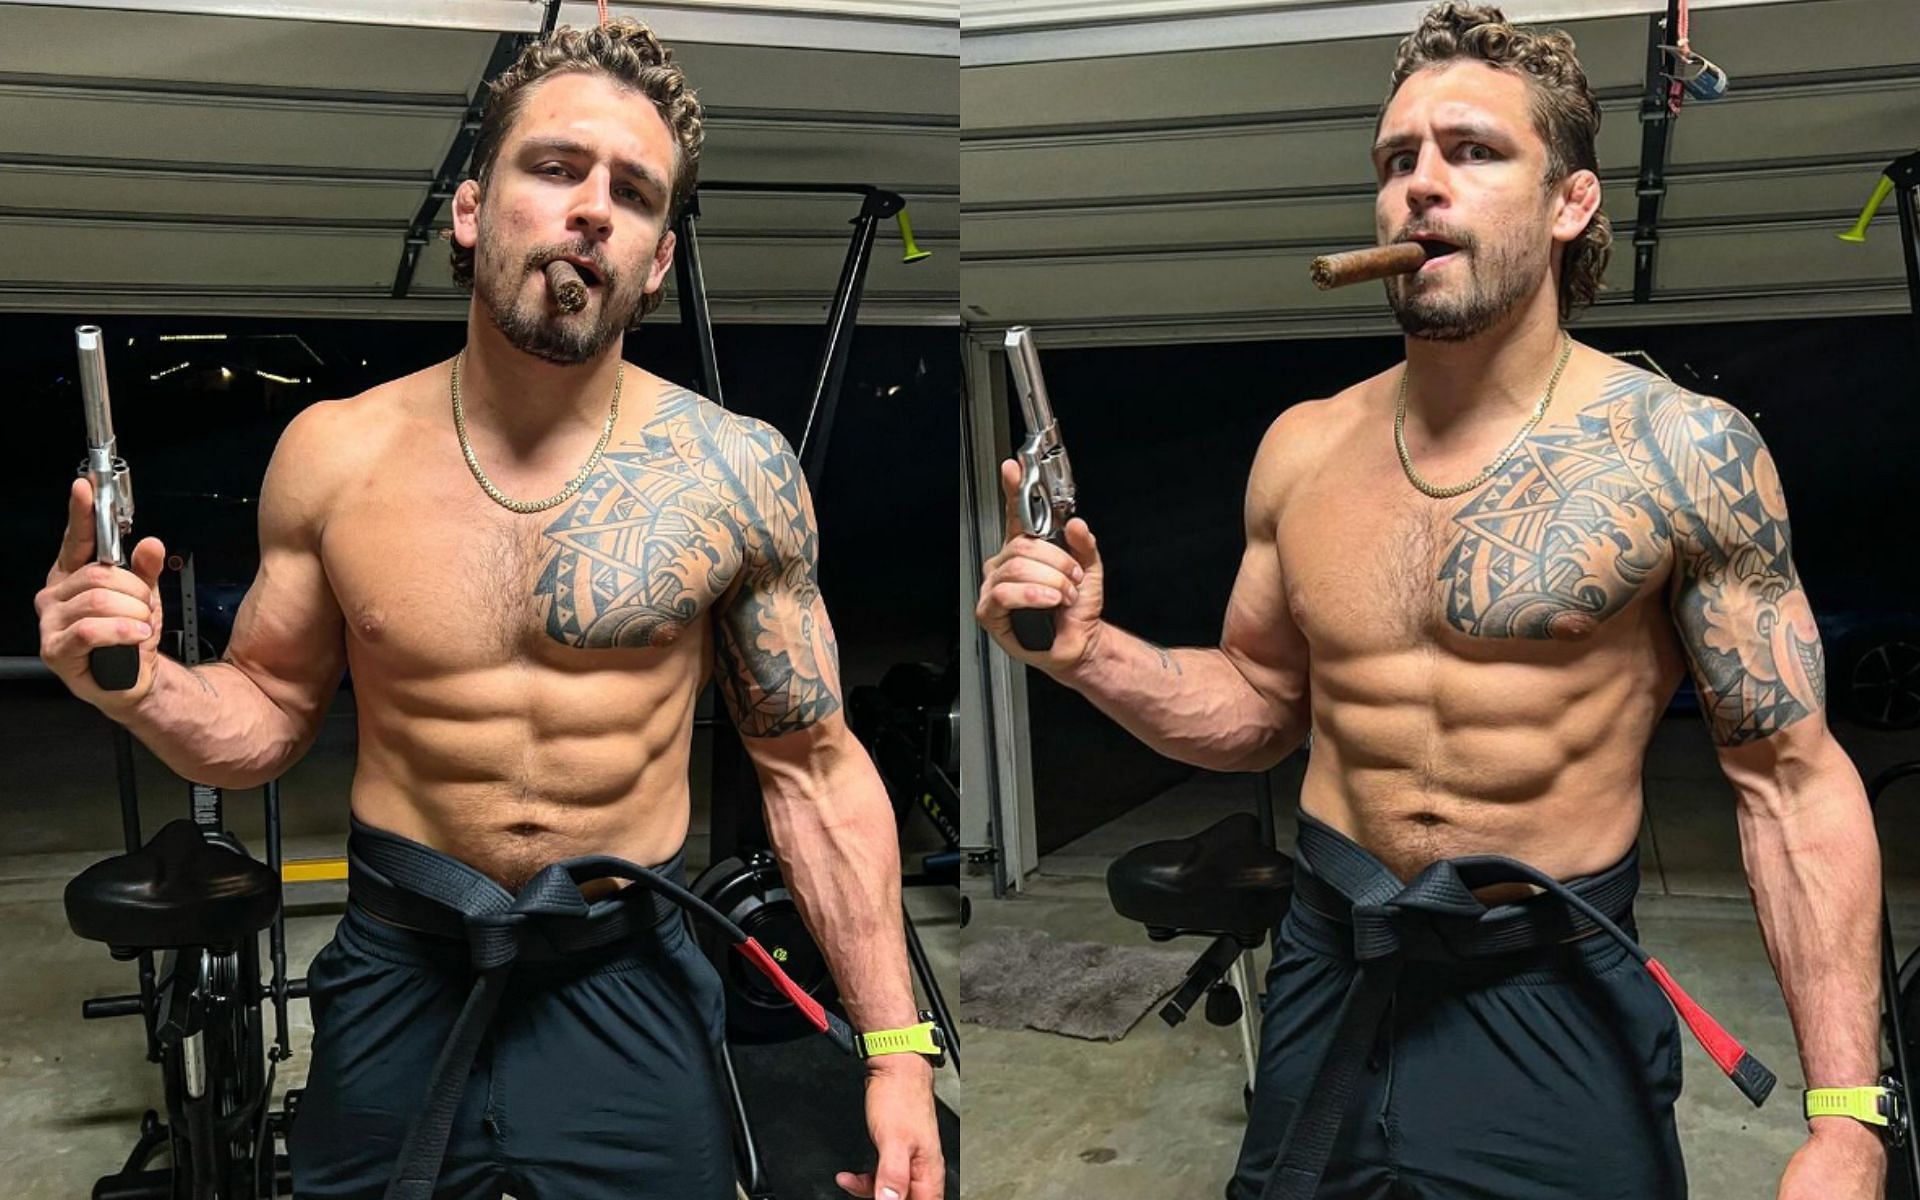 BJJ black belt Nicky Rodriguez (pictured) says former UFC champion was &quot;unexpectedly good&quot; at grappling after training together [Images Courtesy: @nickyrod247 on Instagram]